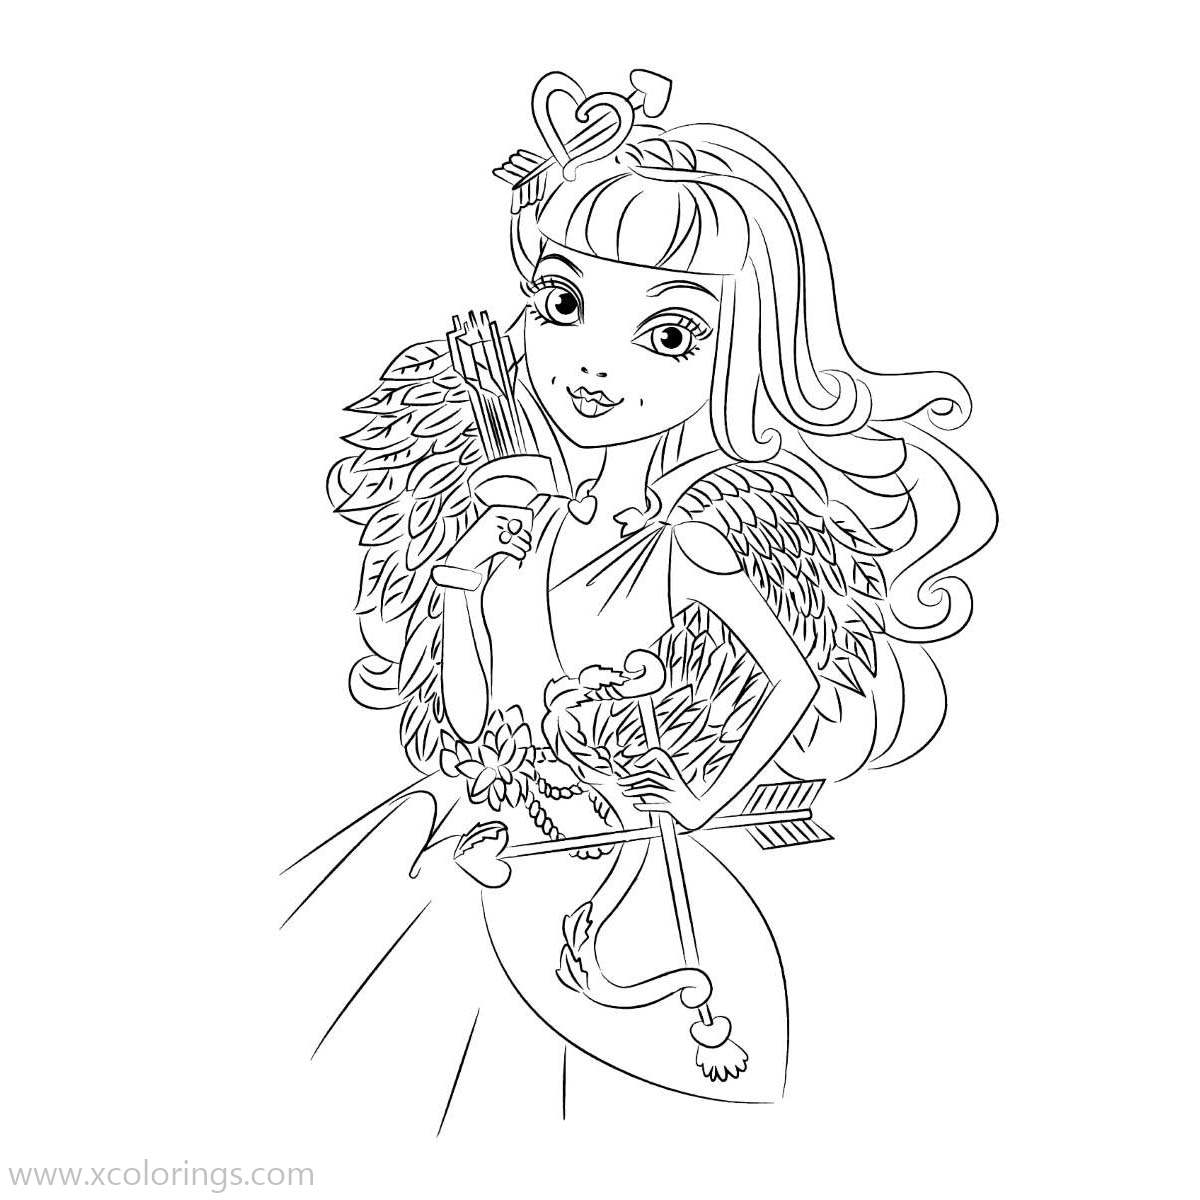 Free Ever After High Coloring Pages Bow and Arrow printable